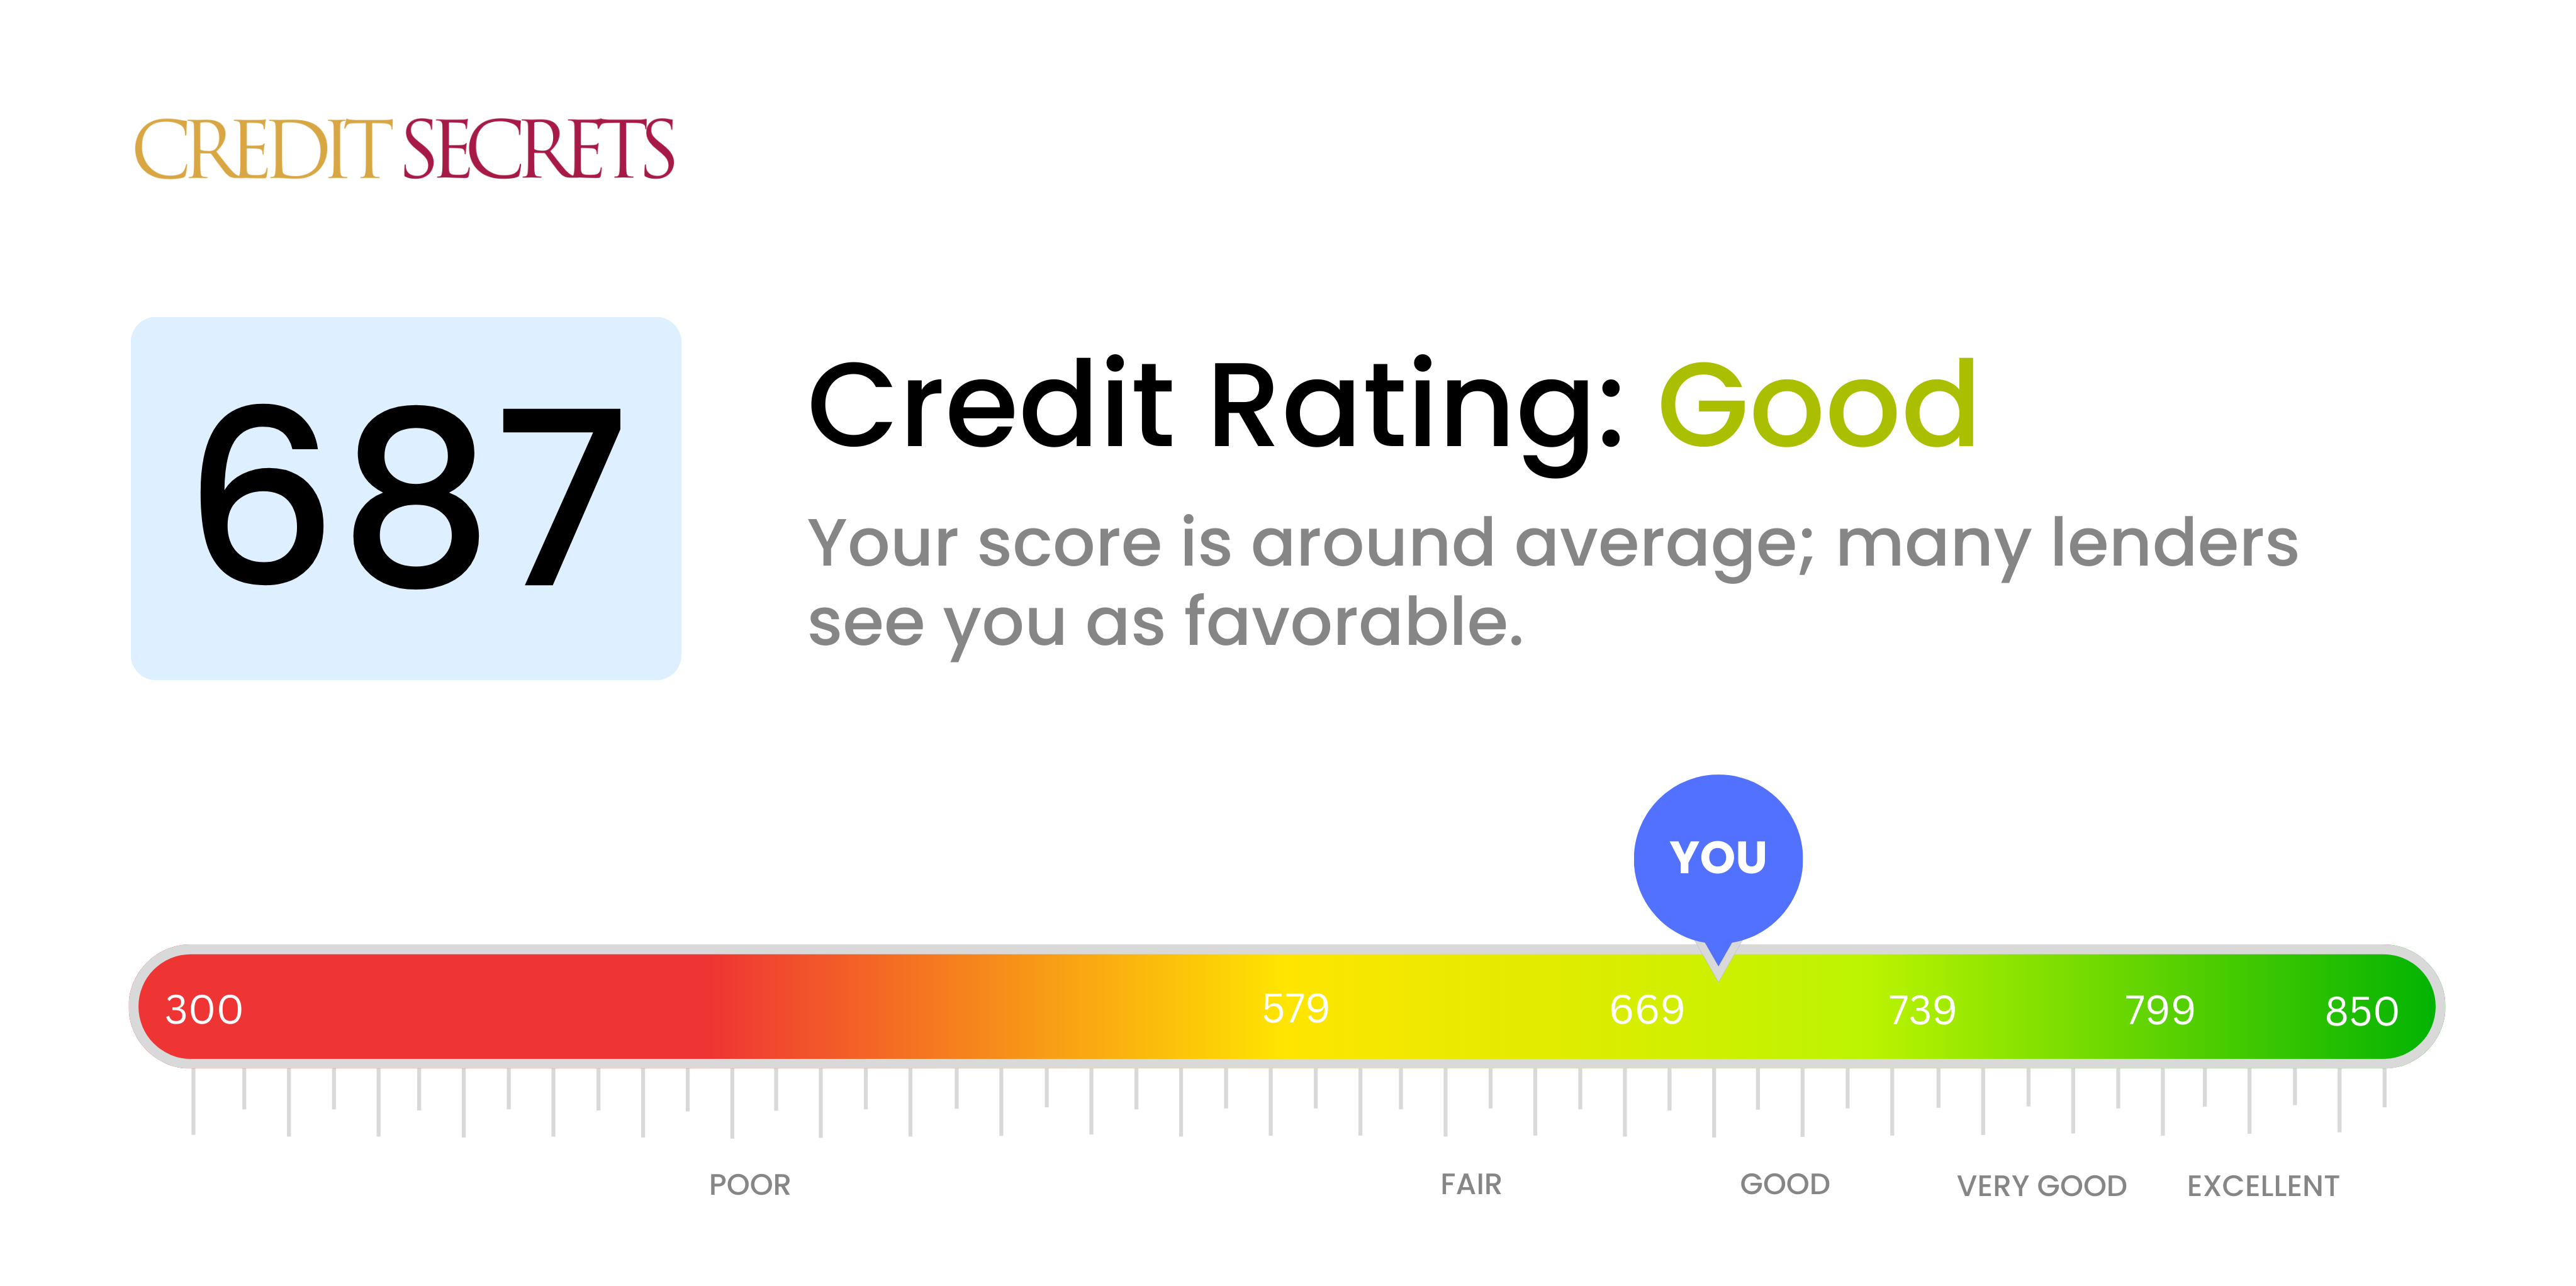 Is 687 a good credit score?